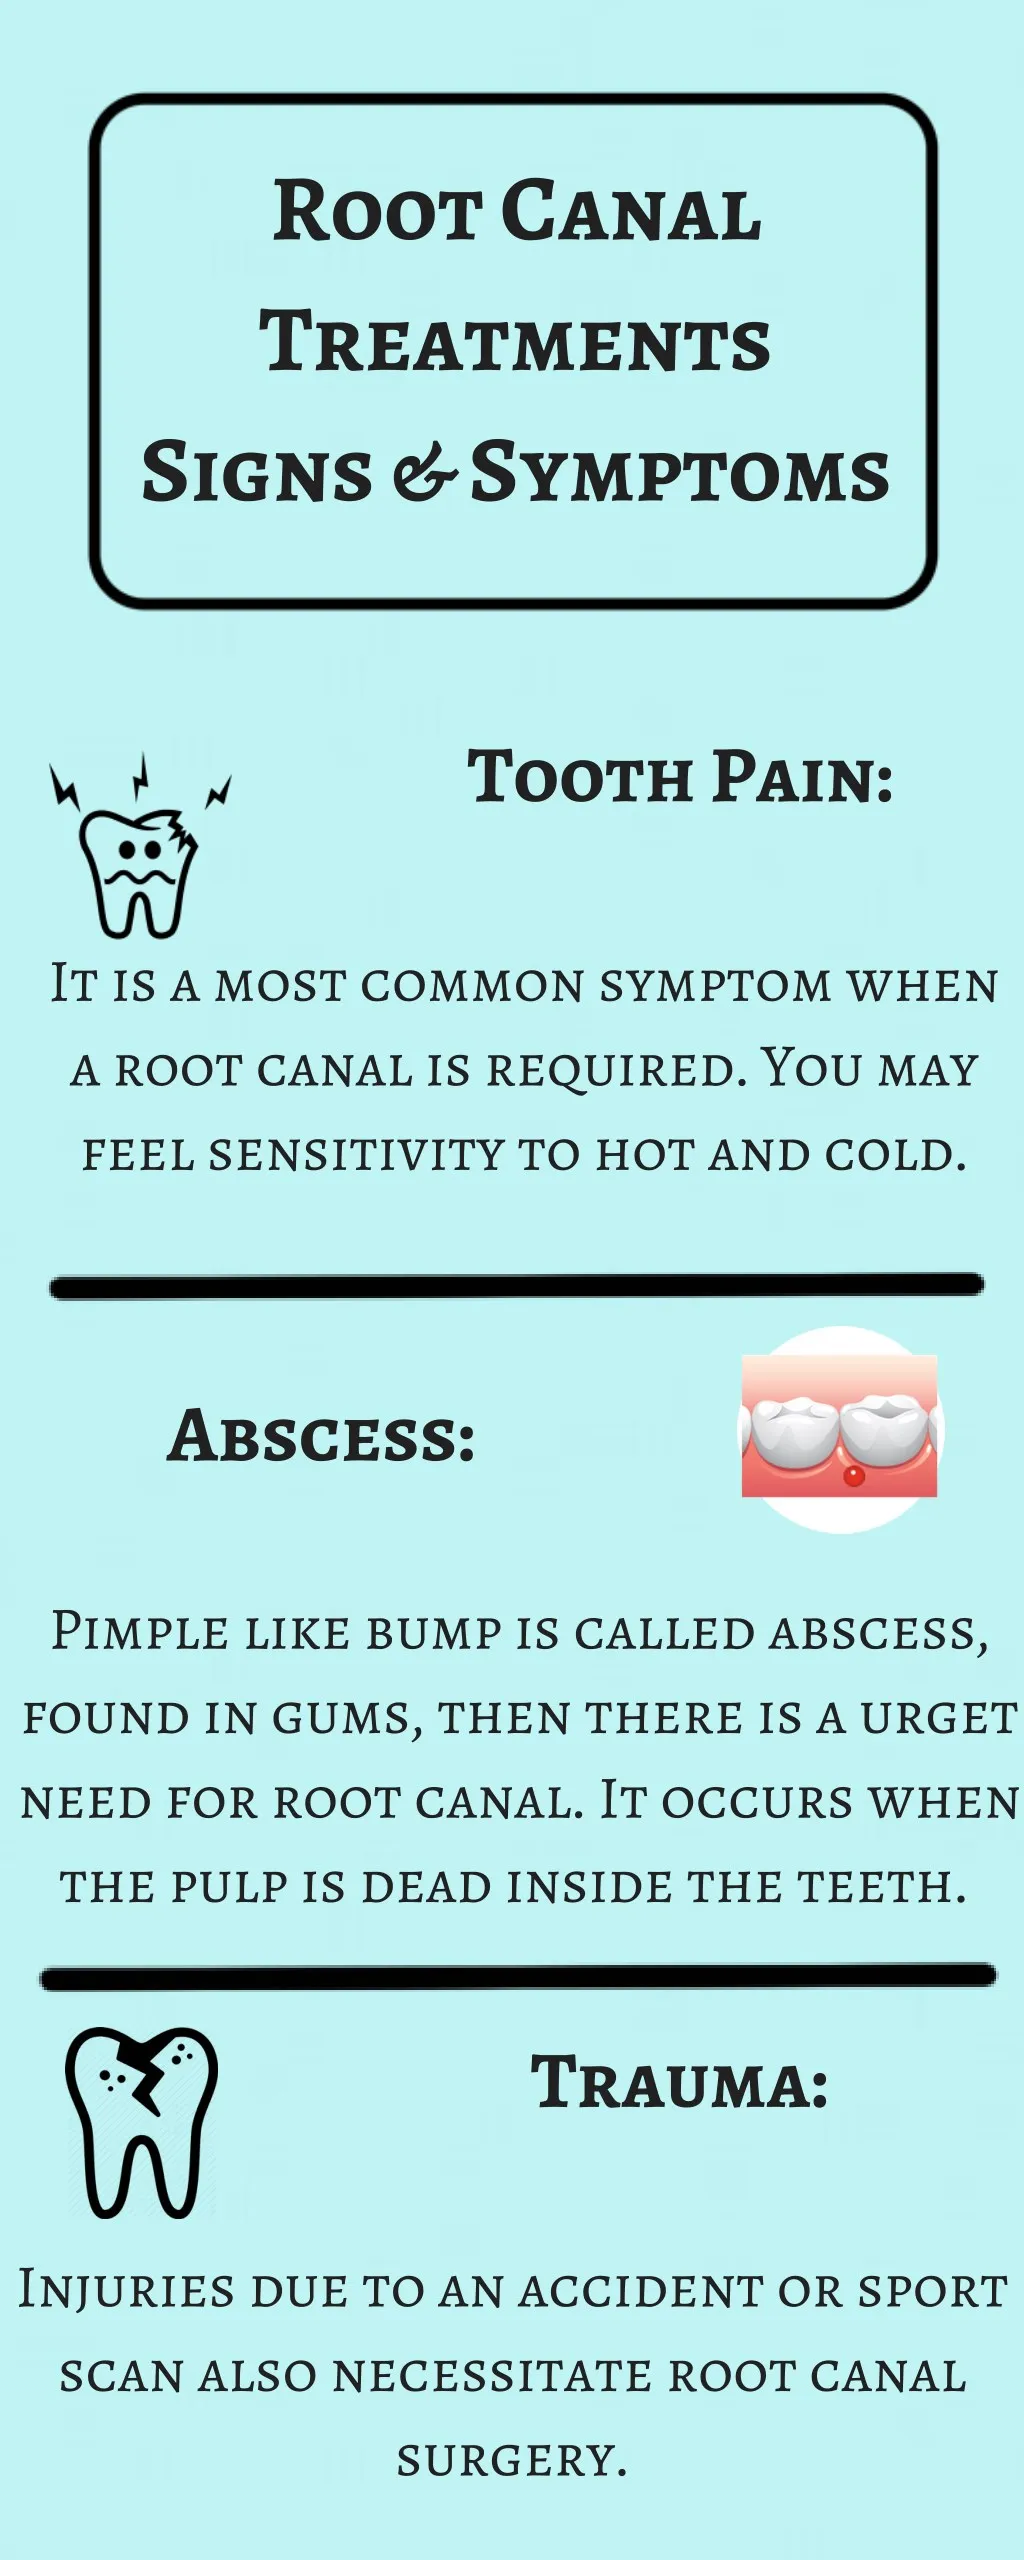 root canal treatments signs symptoms